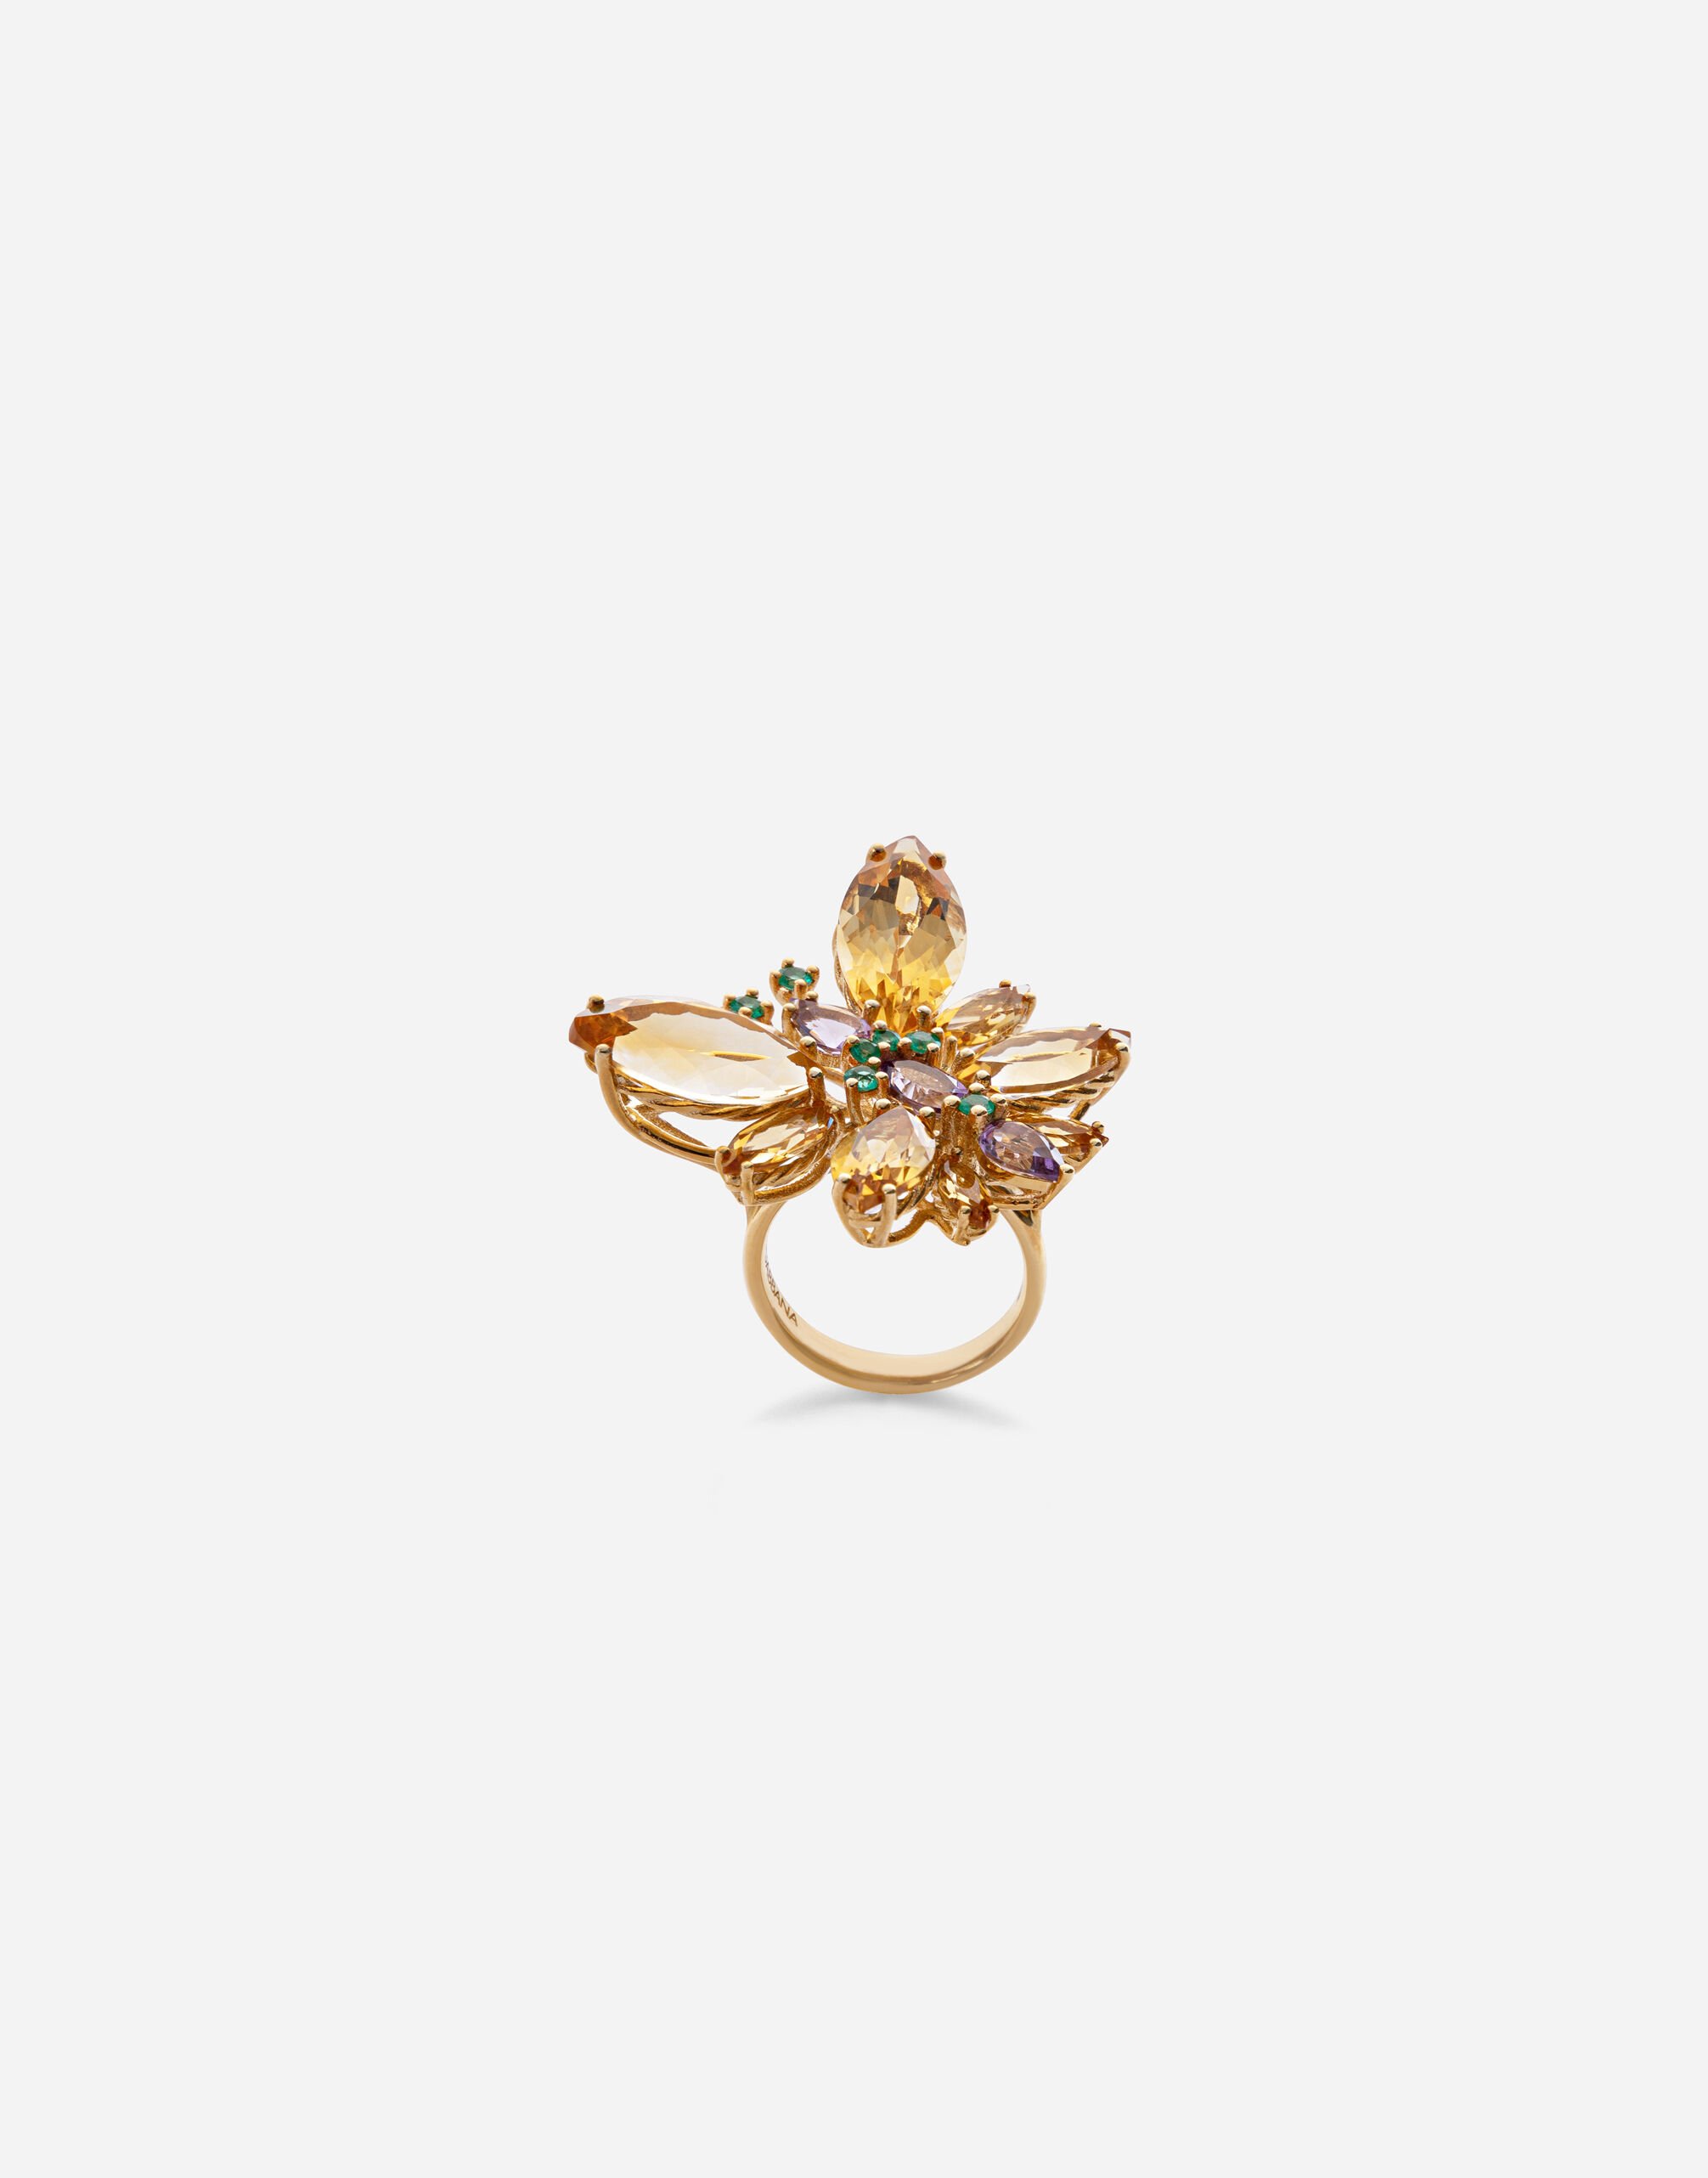 Dolce & Gabbana Spring ring in yellow 18kt gold with citrine butterfly Gold WRMR1GWMIXS